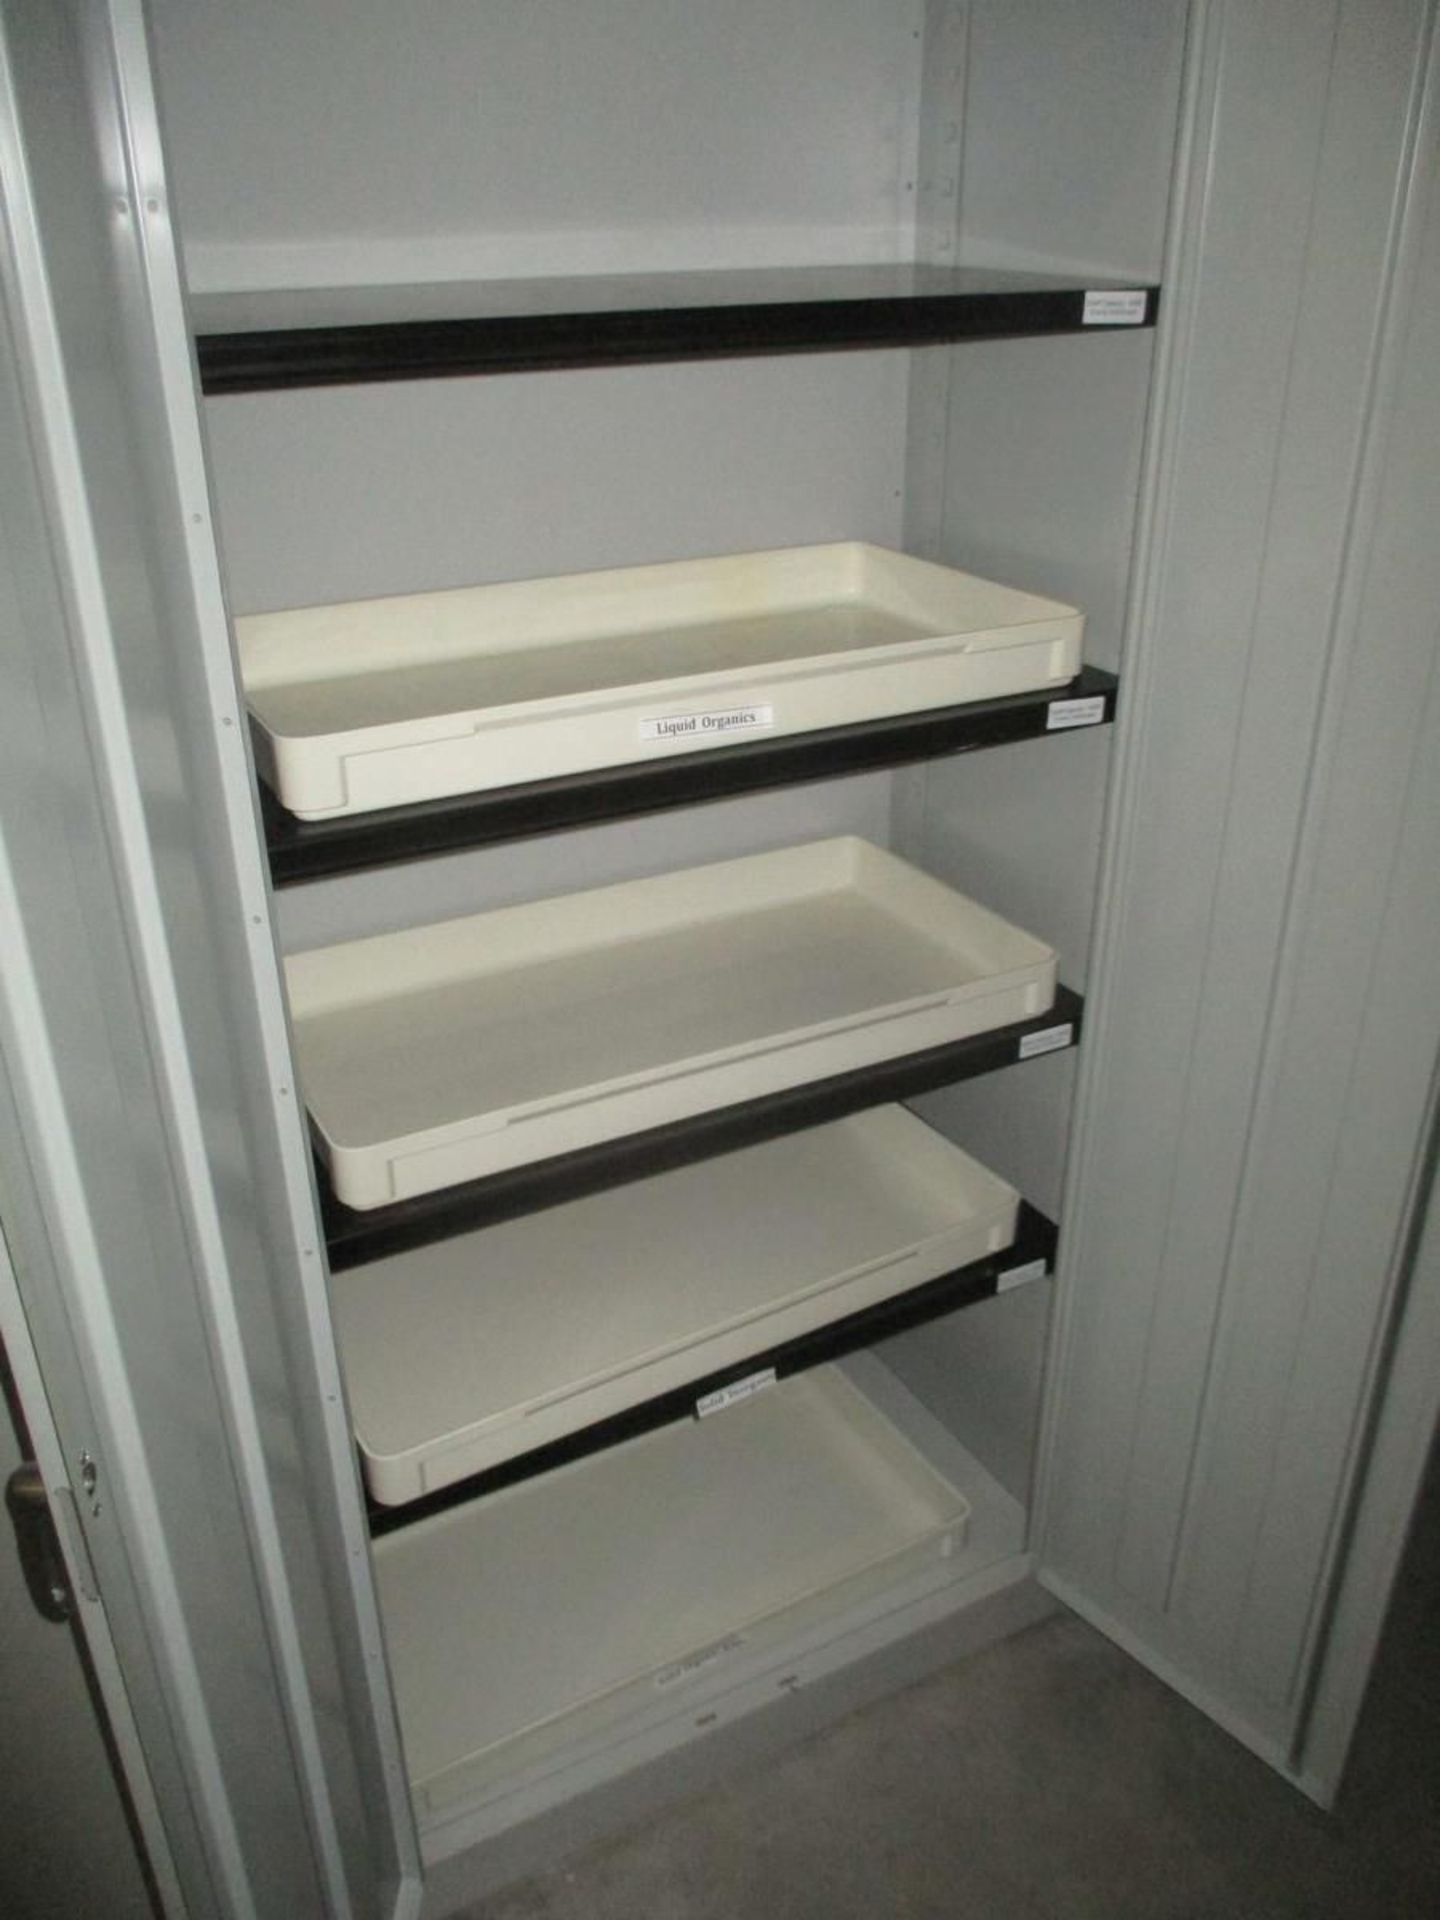 36"" W x 18"" D x 78"" H Steel Storage Cabinets - Image 6 of 8